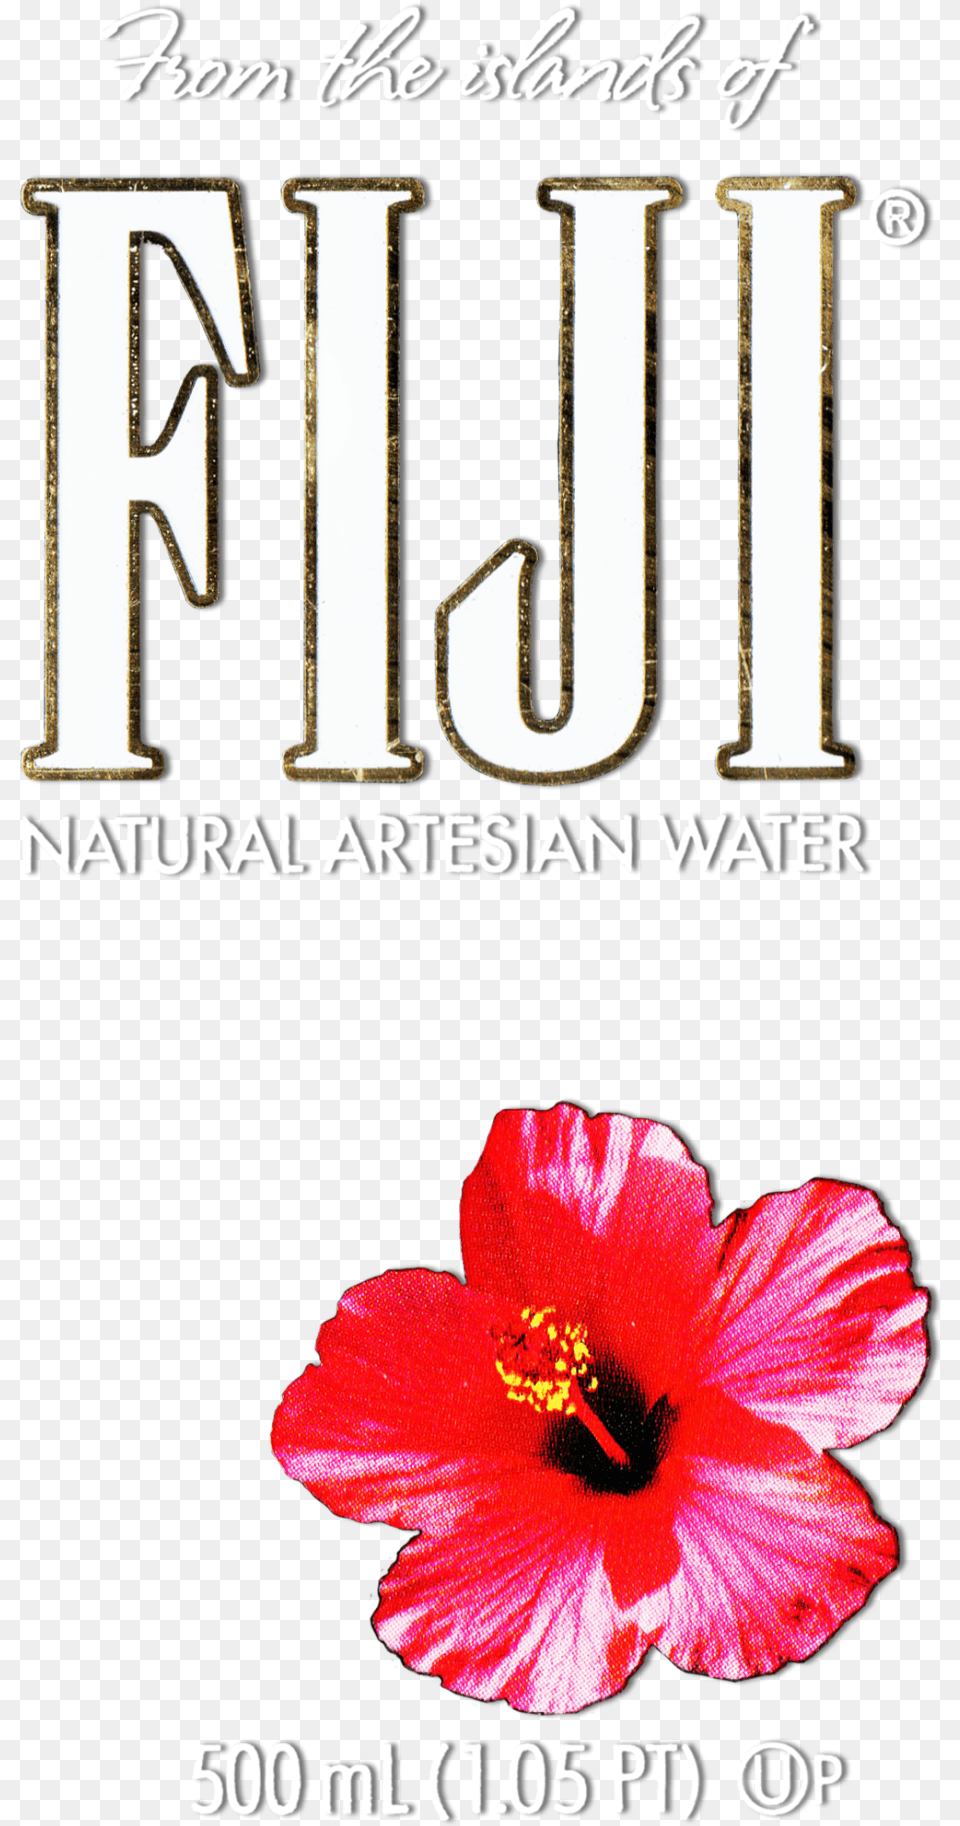 Hibiscus Flower Image Collections Fiji Water Bottle Flower, Plant, Book, Publication, Rose Png